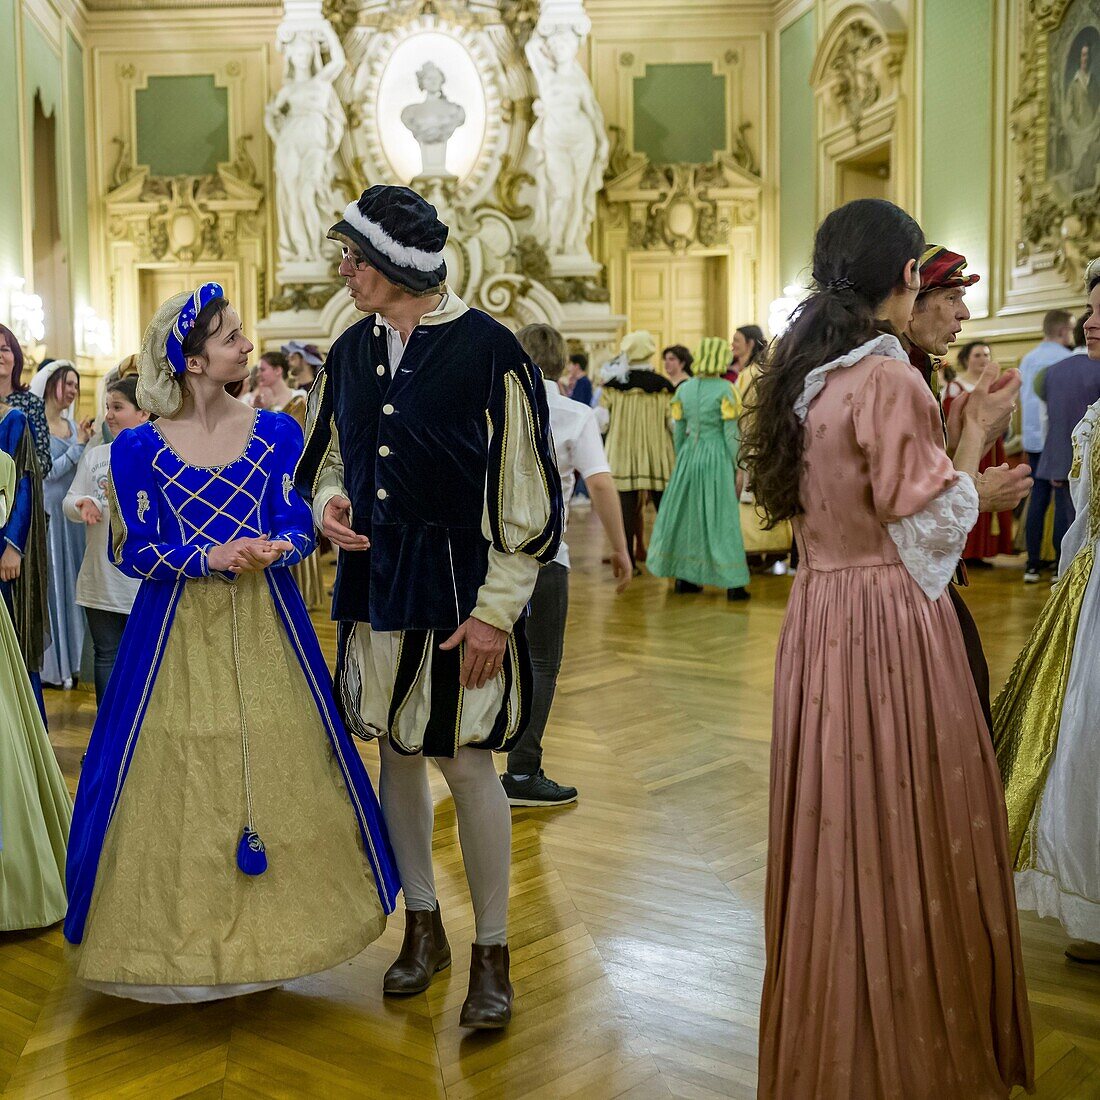 France,Indre et Loire,Loire valley listed as World Heritage by UNESCO,Tours,party hall at the City Hall,Renaissance ball in costume